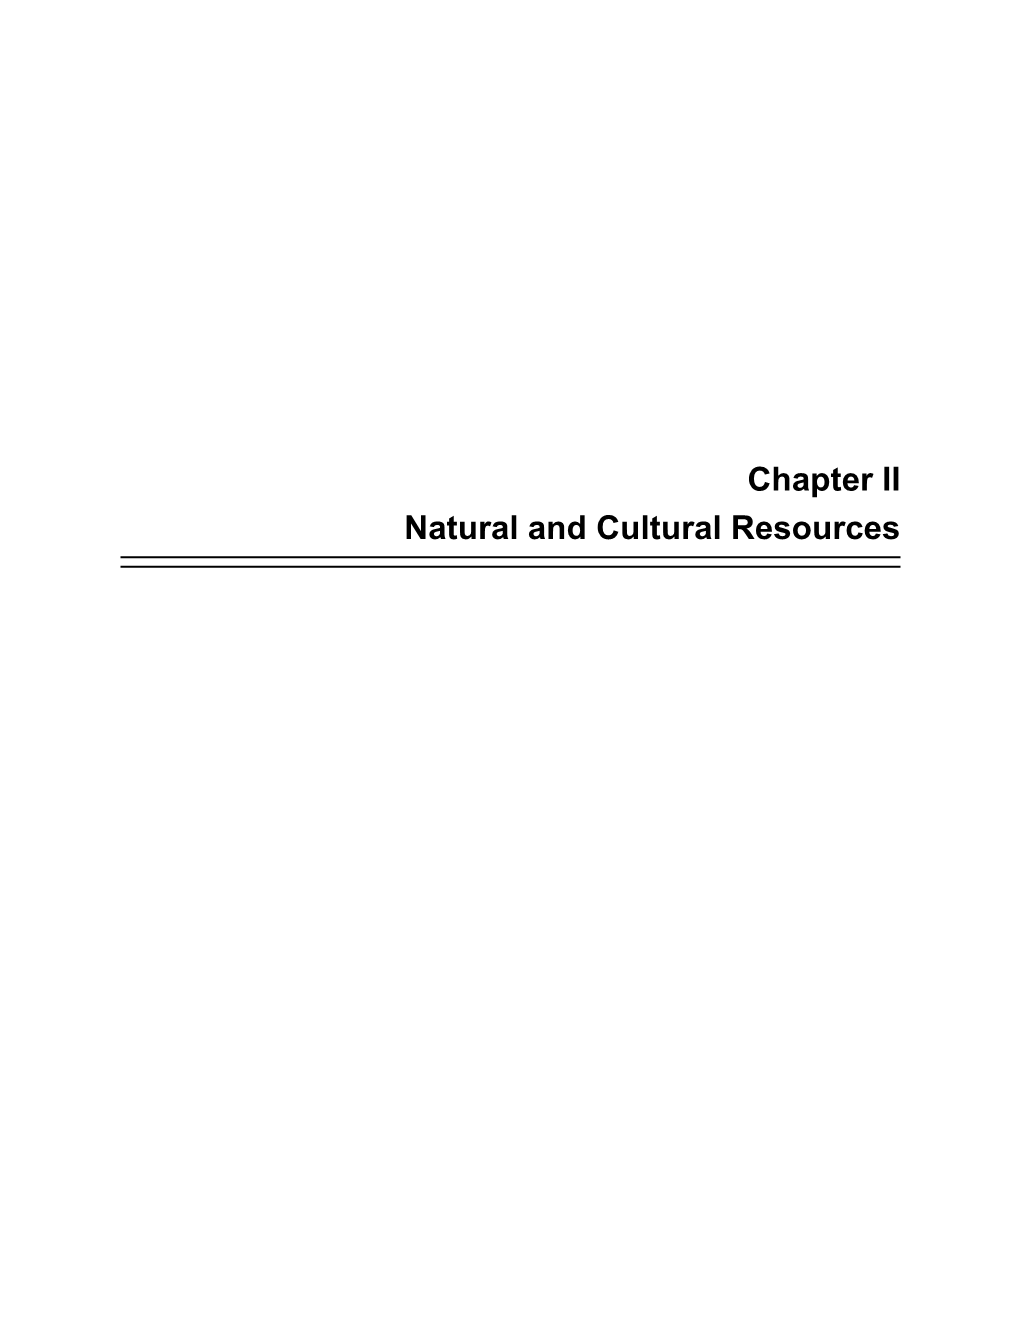 Chapter II Natural and Cultural Resources